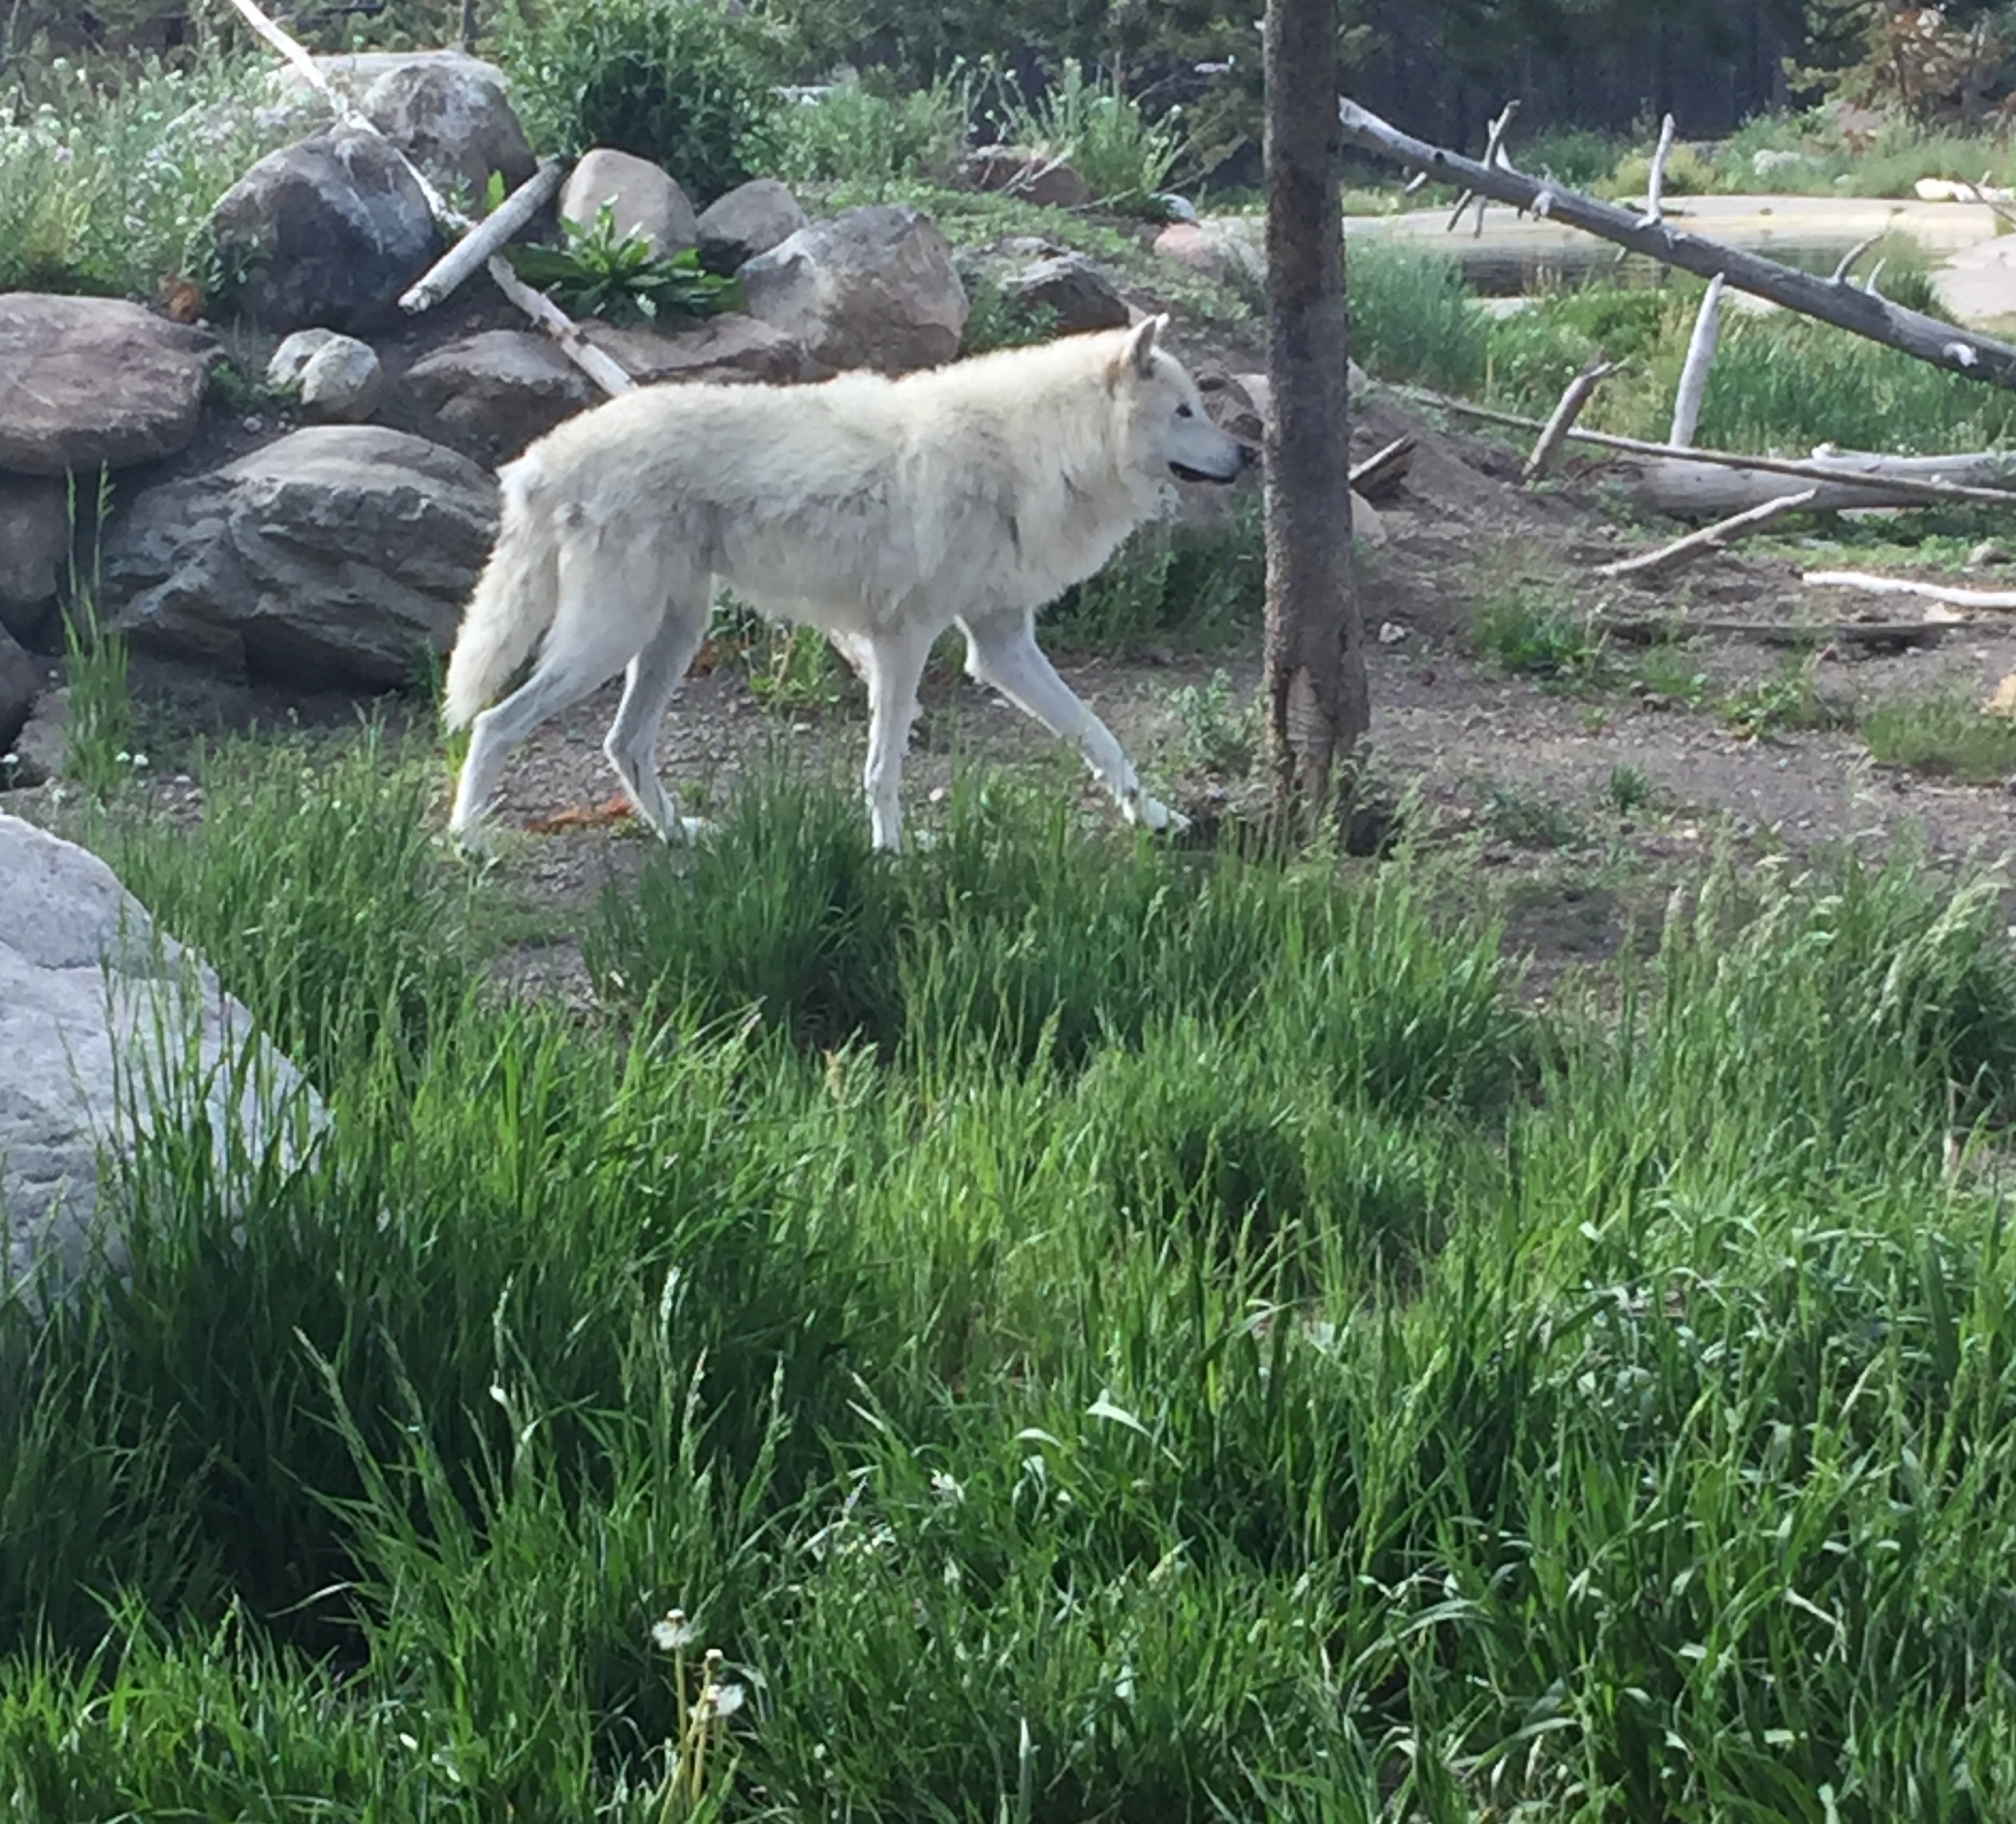  Gray Wolf at the Grizzly-Wolf Discovery Center.&nbsp; Beautiful to watch the pair interacting.&nbsp; They are so like their domesticated kin, dogs. 